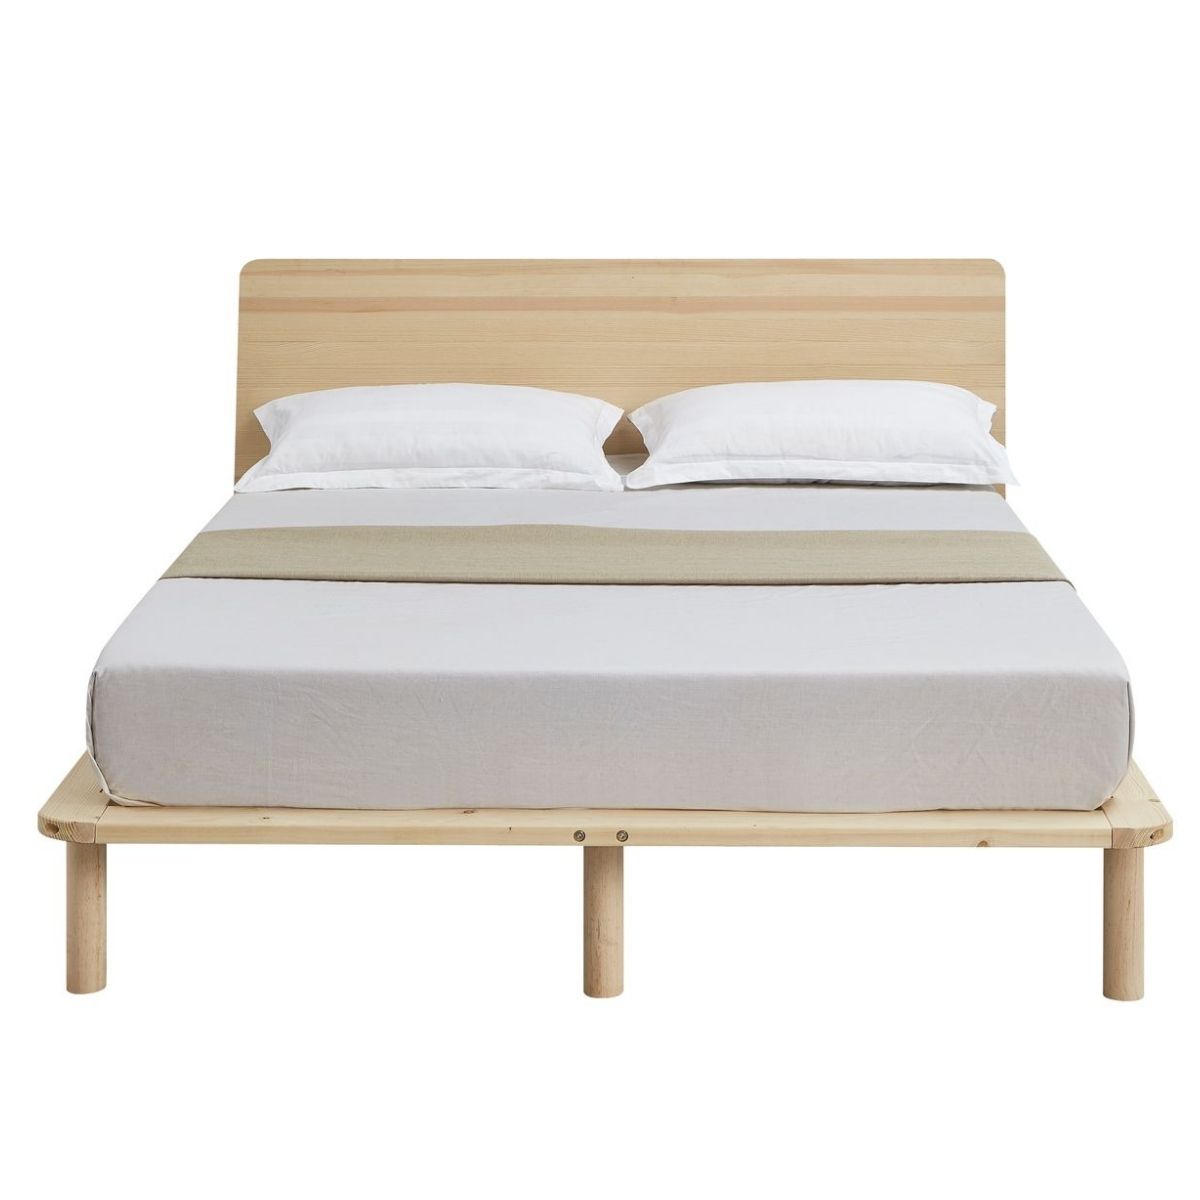 Natural Solid Wood Bed Frame Bed Base with Headboard King - SILBERSHELL